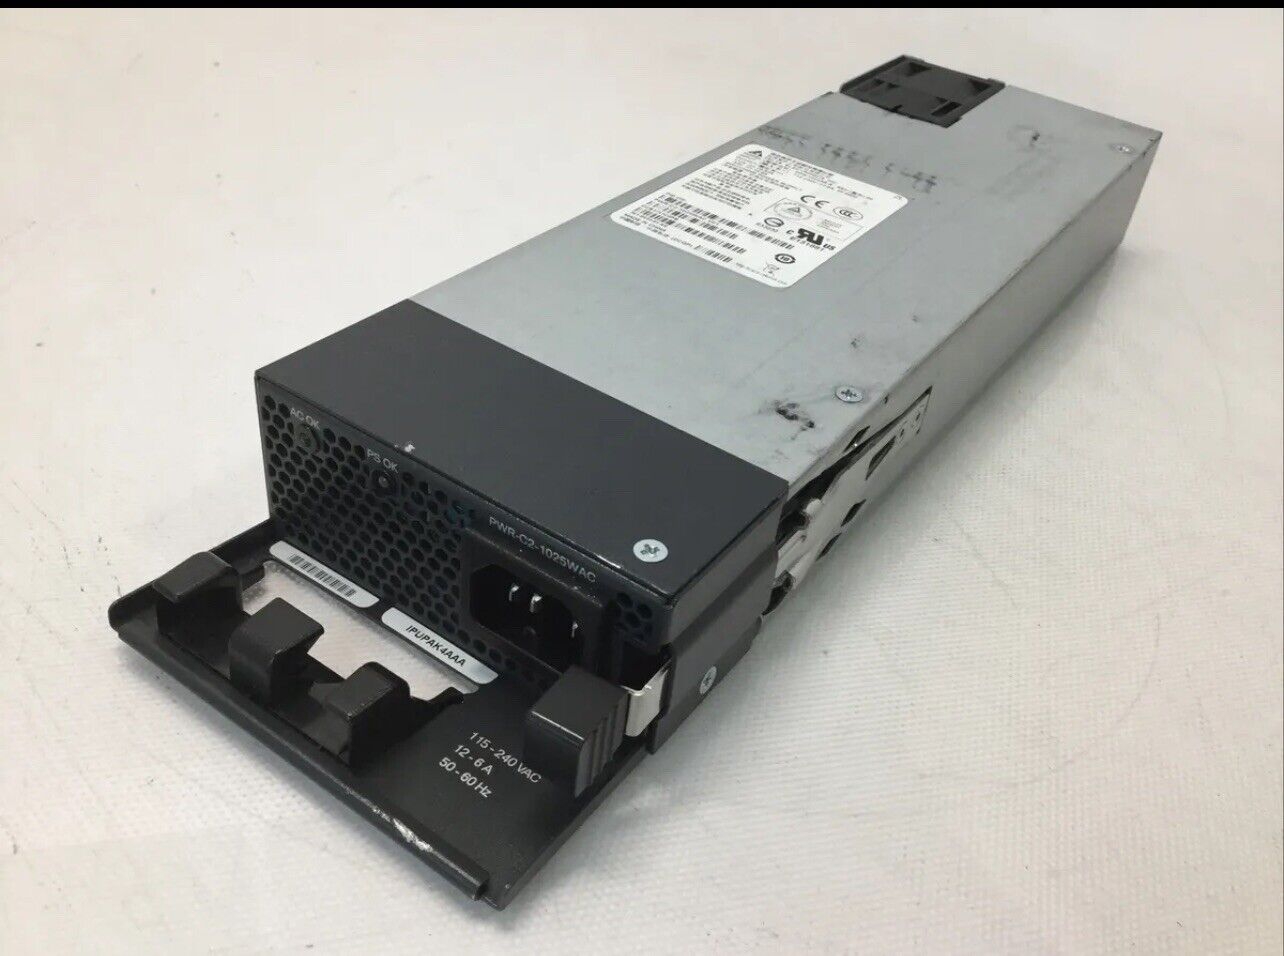 Cisco PWR-C2-1025WAC 1025W AC Power Supply for Catalyst 3650 Series